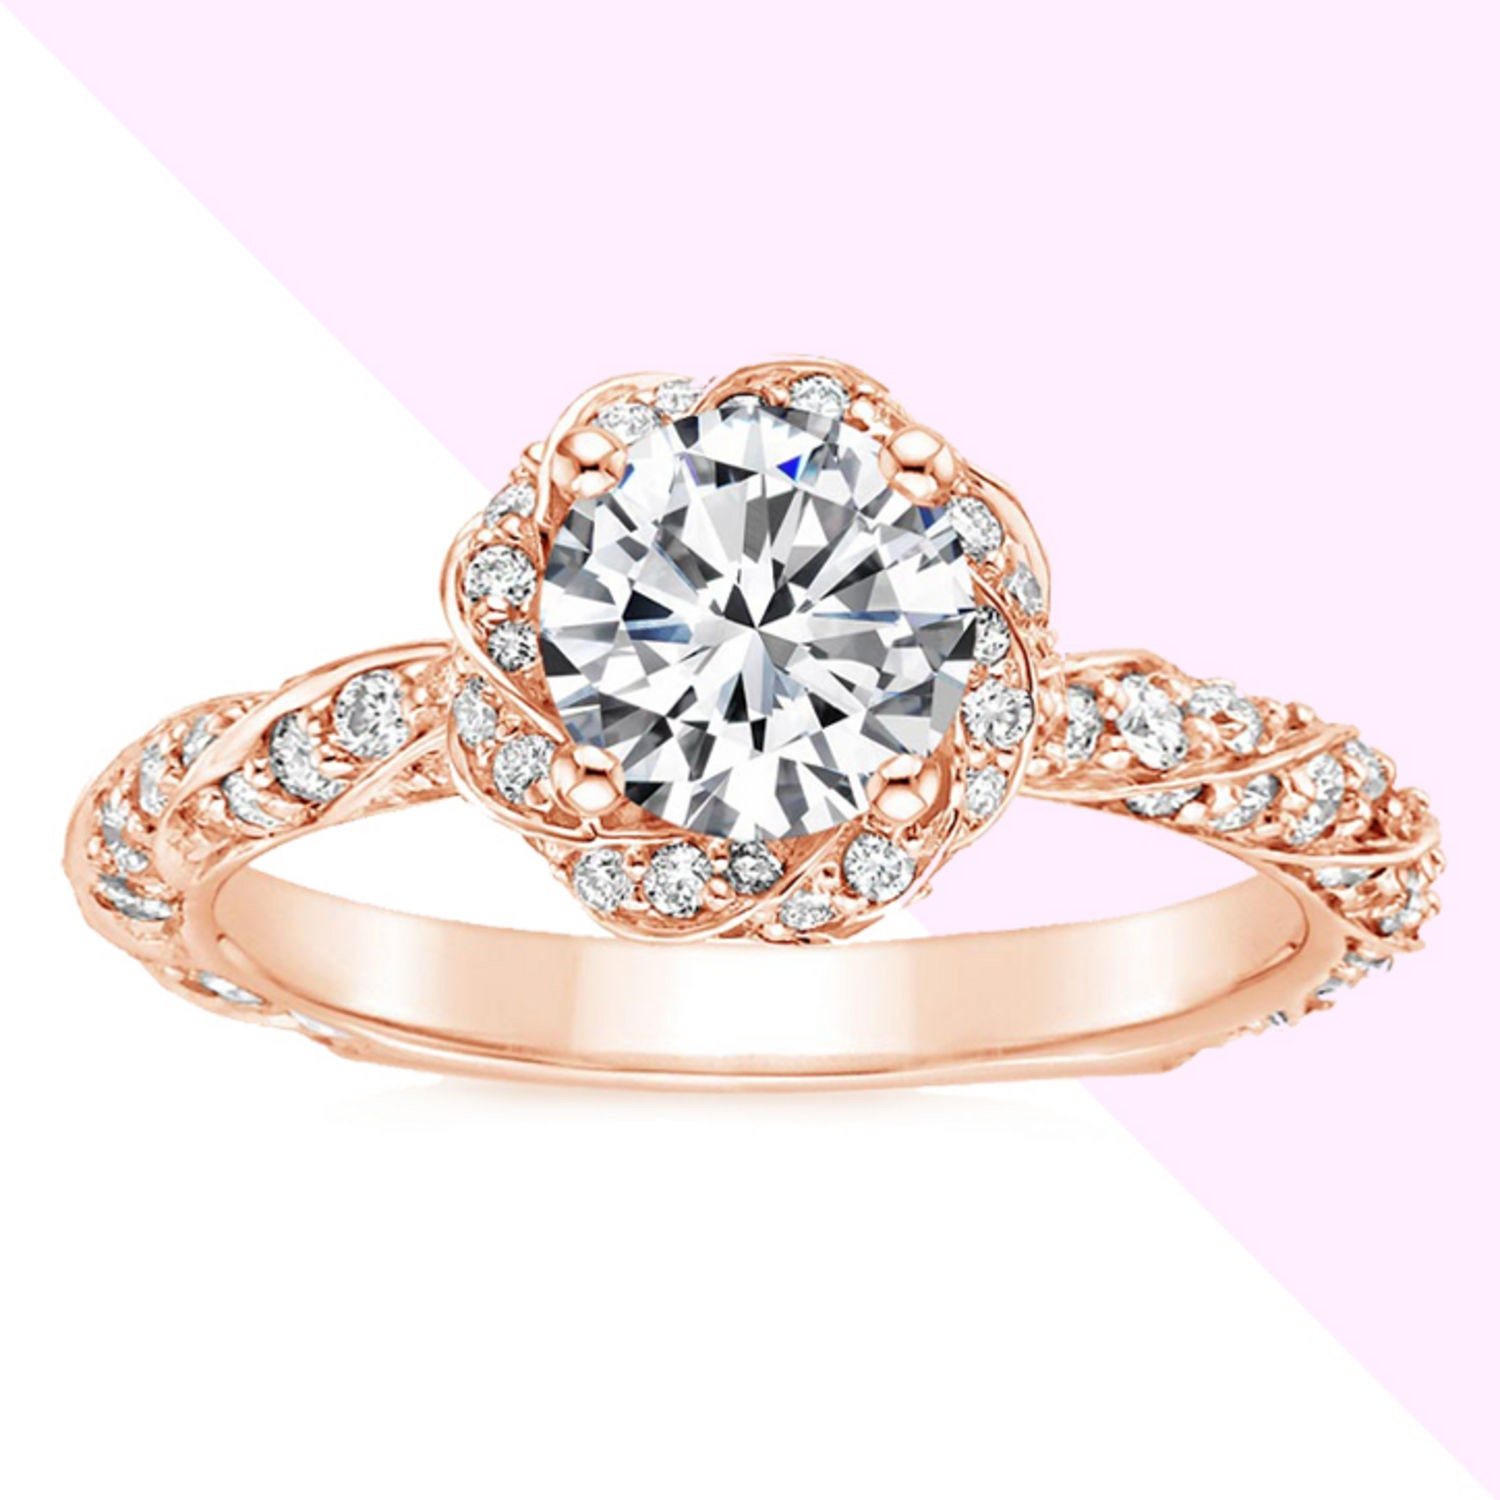 Best Diamond Rings
 These Are the 5 Engagement Rings Everyone s Going to Covet